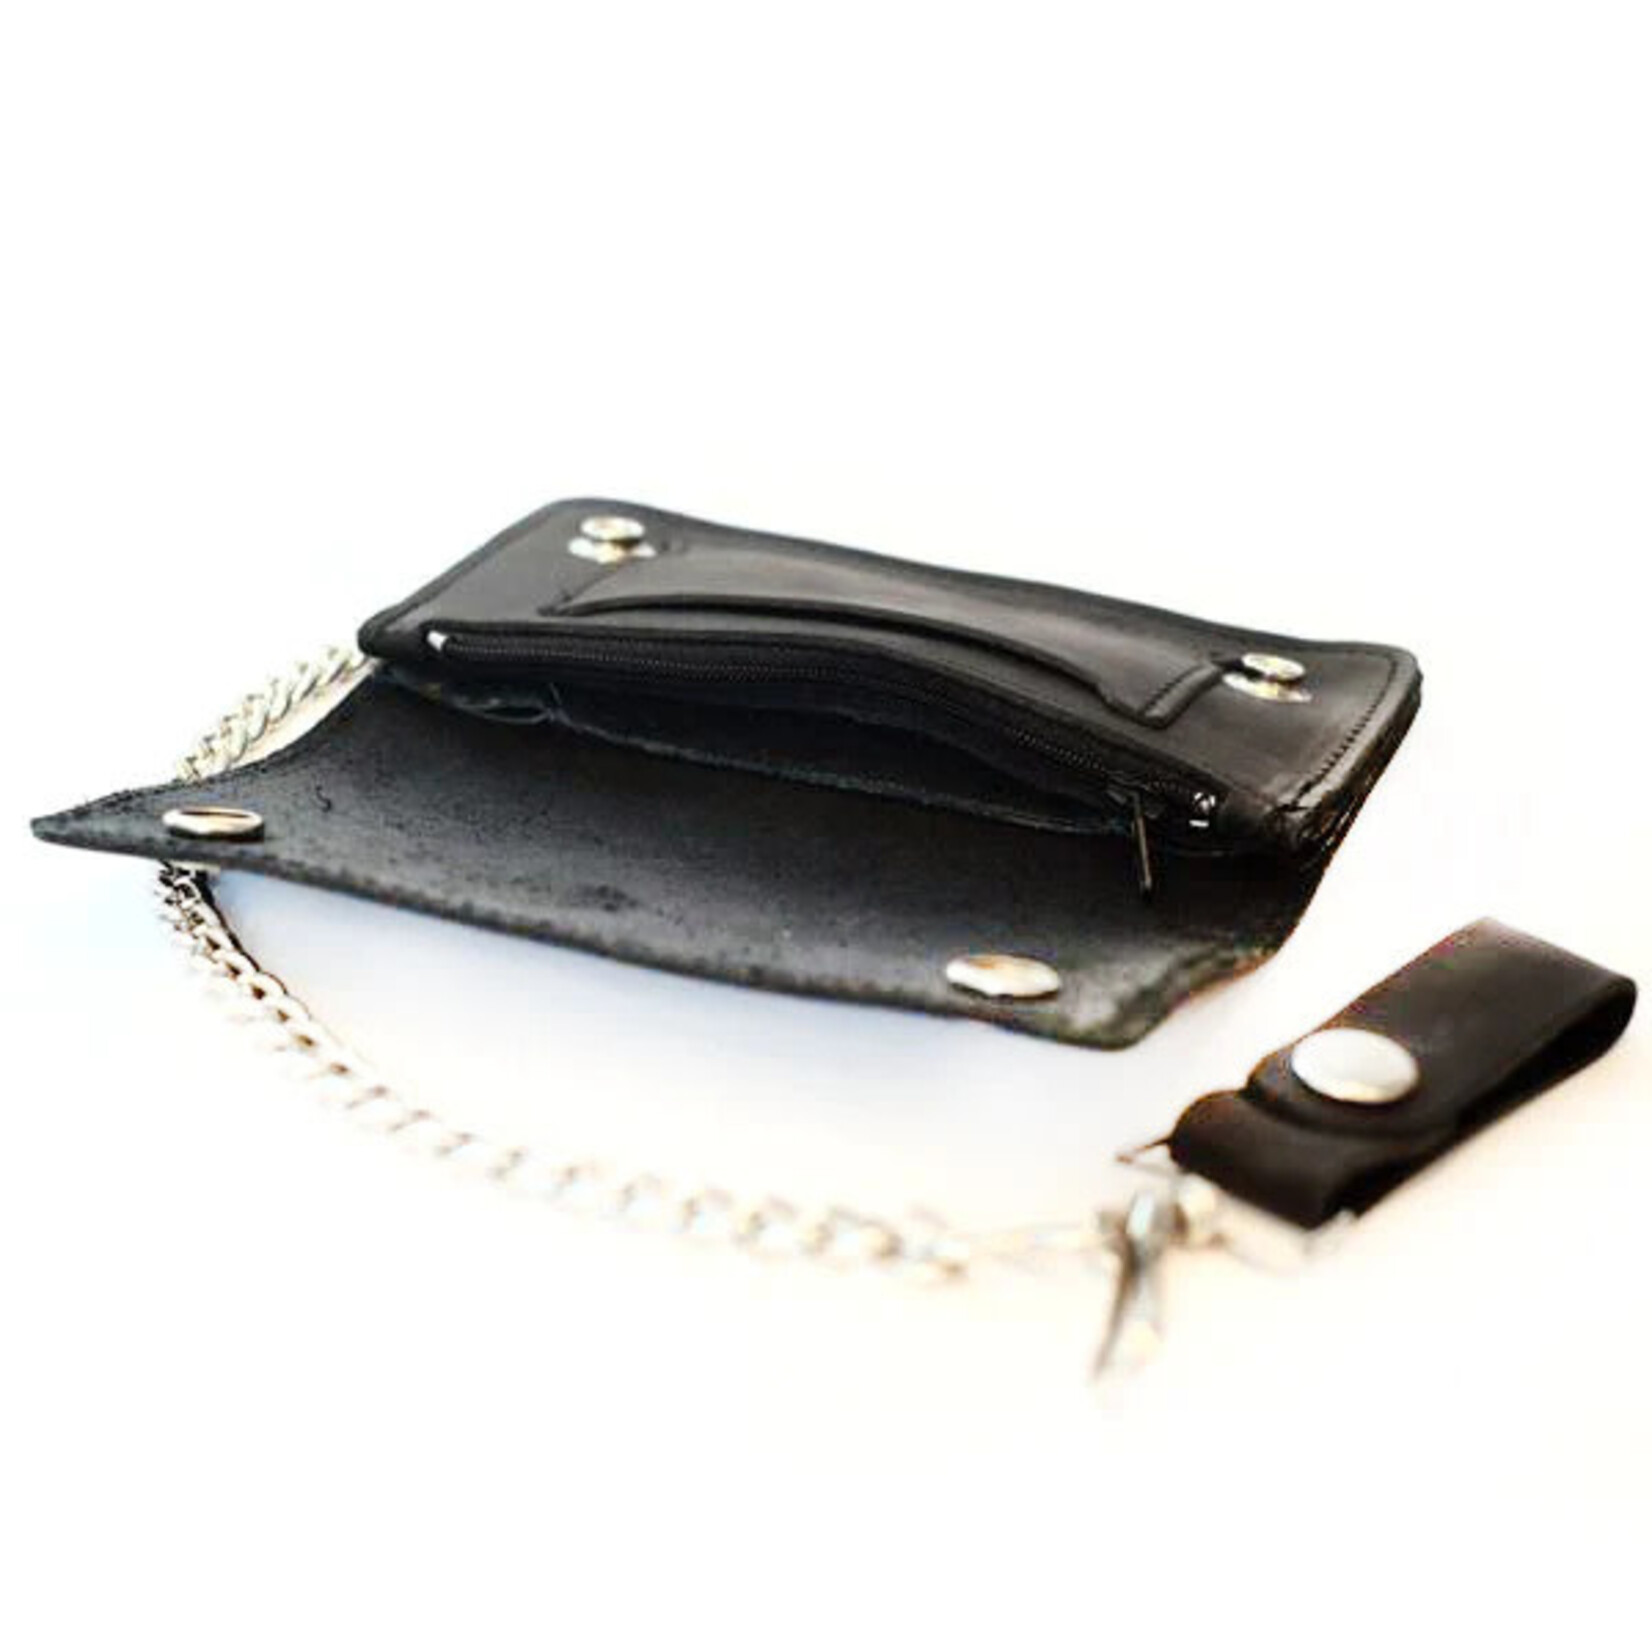 Dogtown Dogtown Vintage Cross Large Leather Chain Wallet - Black